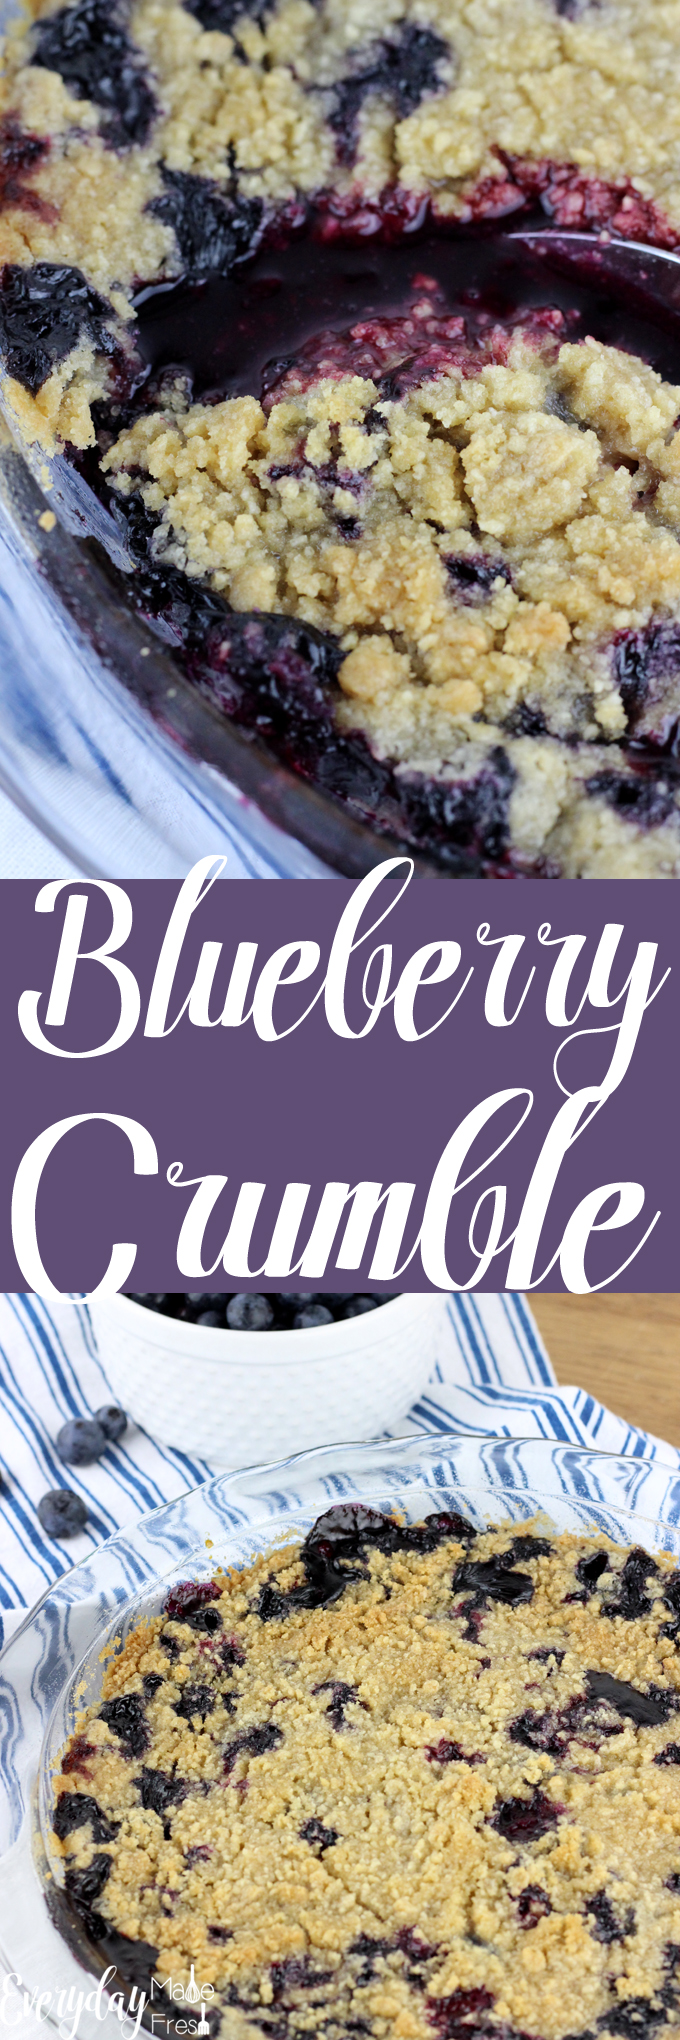 This sweet & simple Blueberry Crumble is the perfect treat for those summer blueberries. It's loaded with fresh blueberries and topped with an irresistible crunchy topping. | EverydayMadeFresh.com